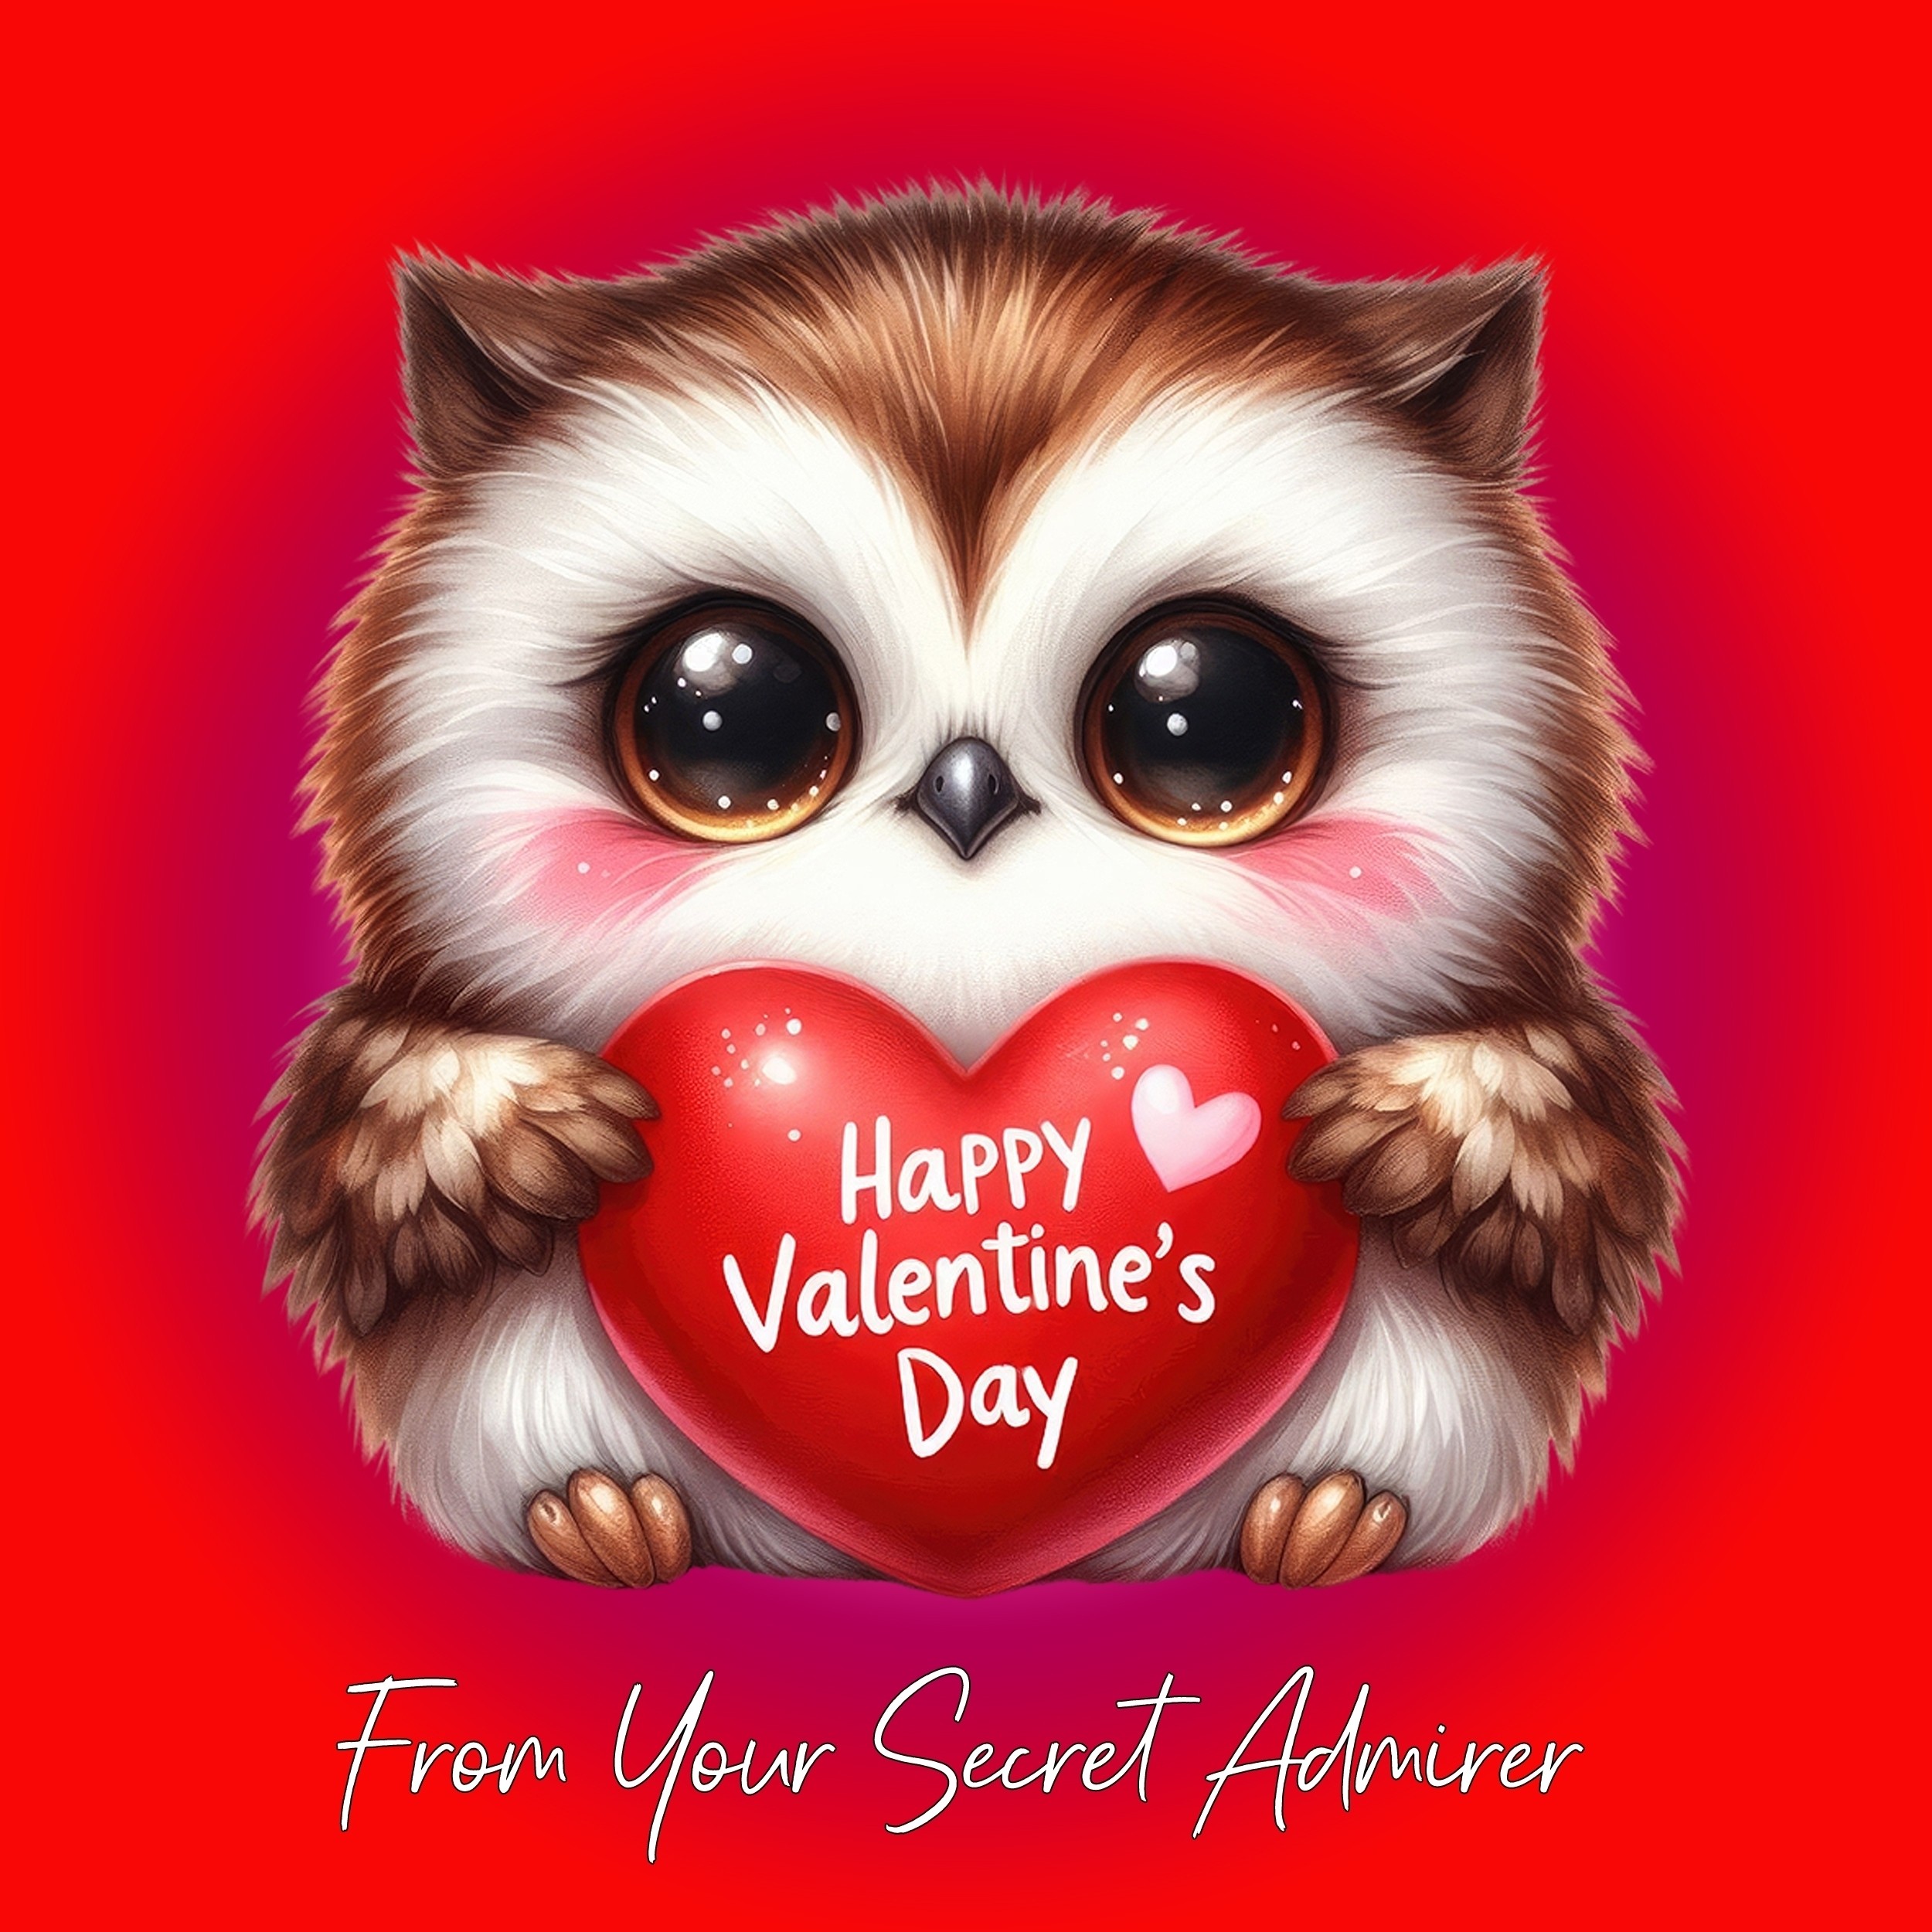 Valentines Day Square Card from Secret Admirer (Owl)